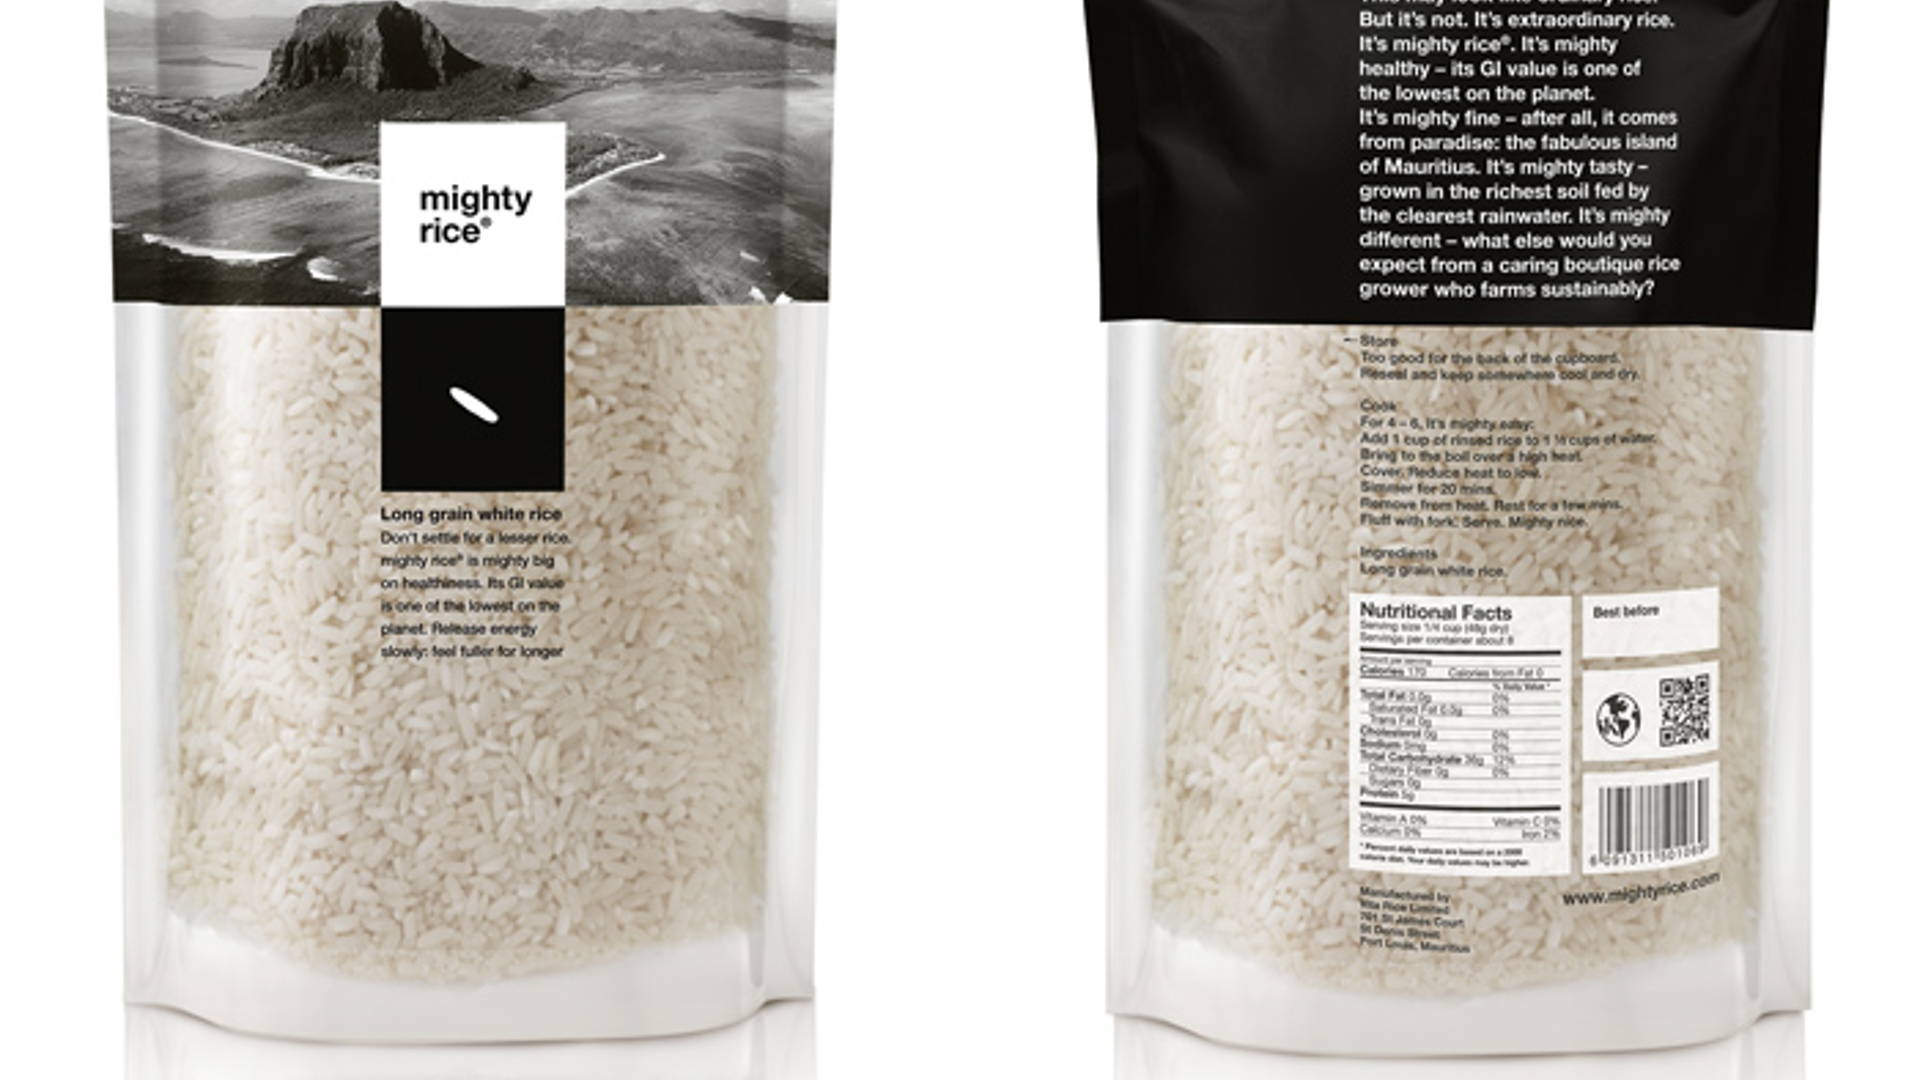 Featured image for The Dieline Package Design Awards 2013: Prepared Food, 3rd Place - Mighty Rice 